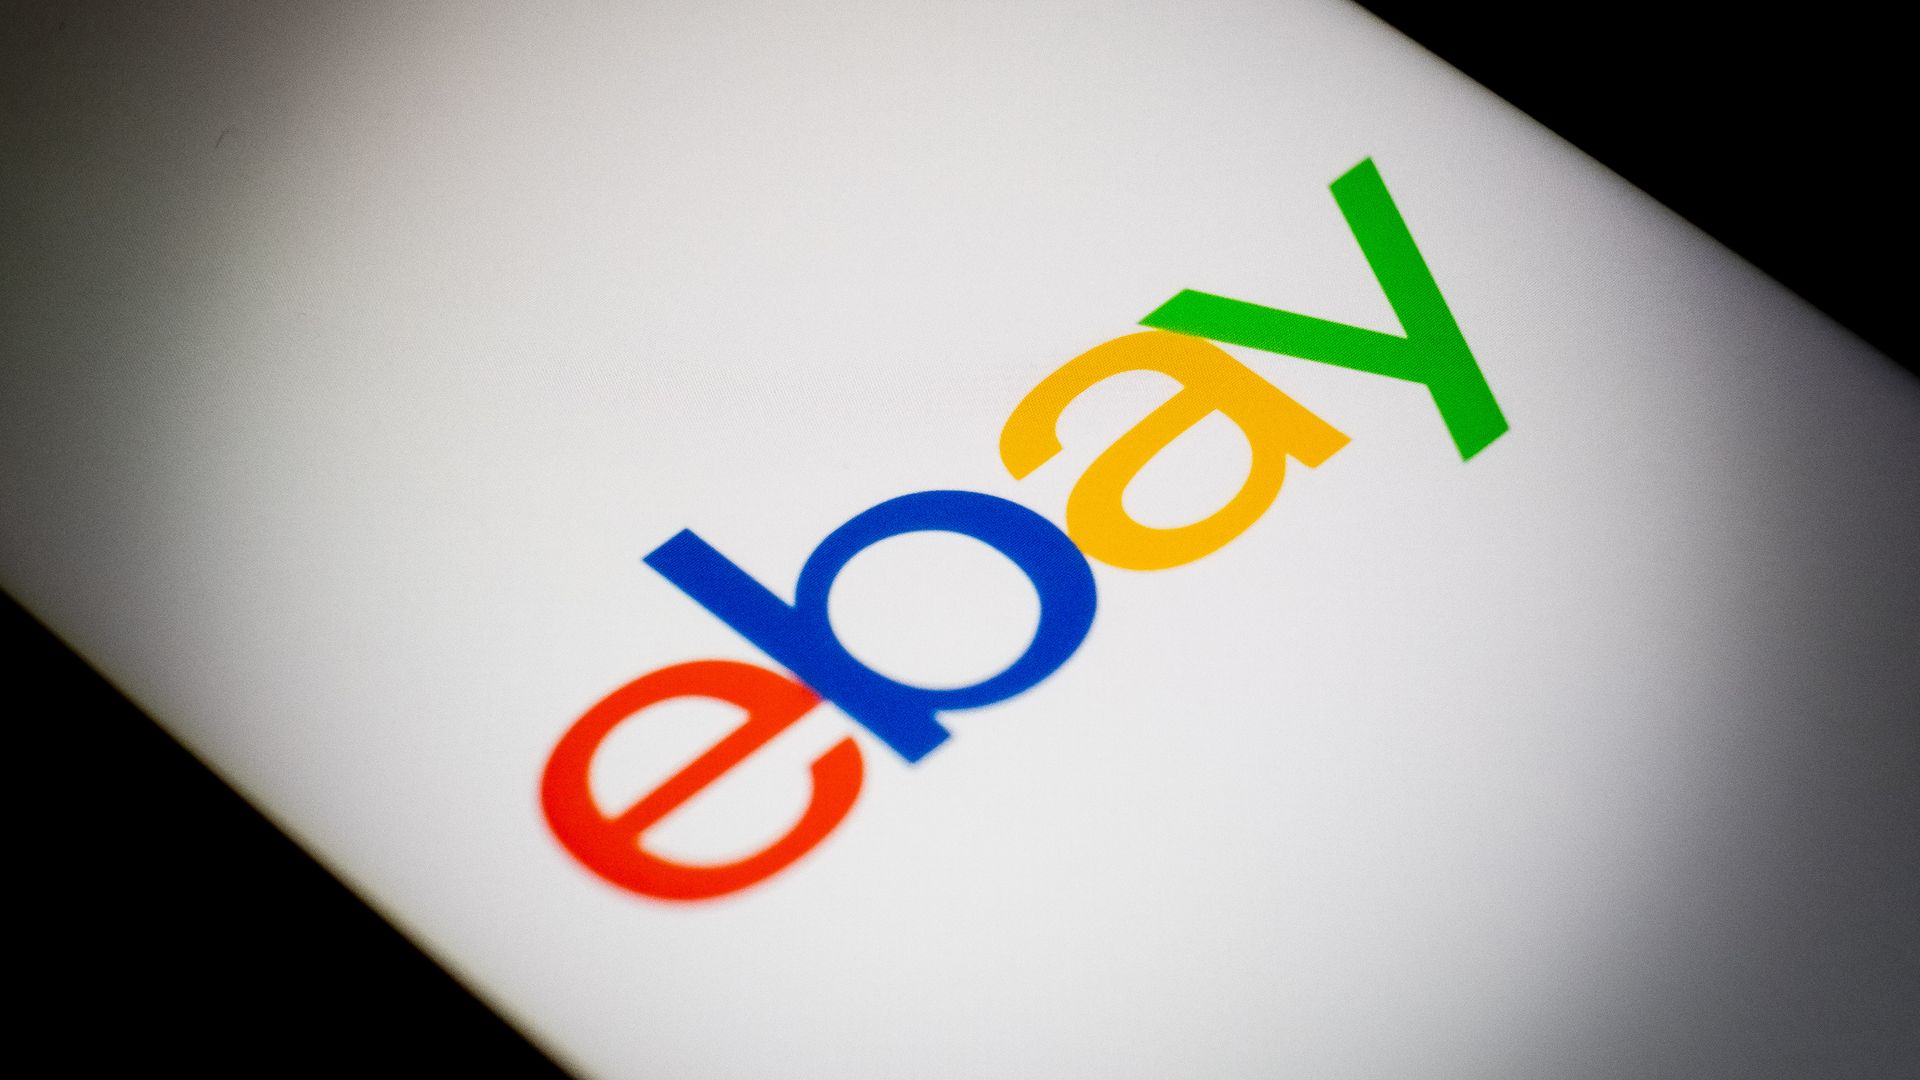 eBay has agreed to pay a  million penalty in connection to a harassment and stalking "intimidation campaign."